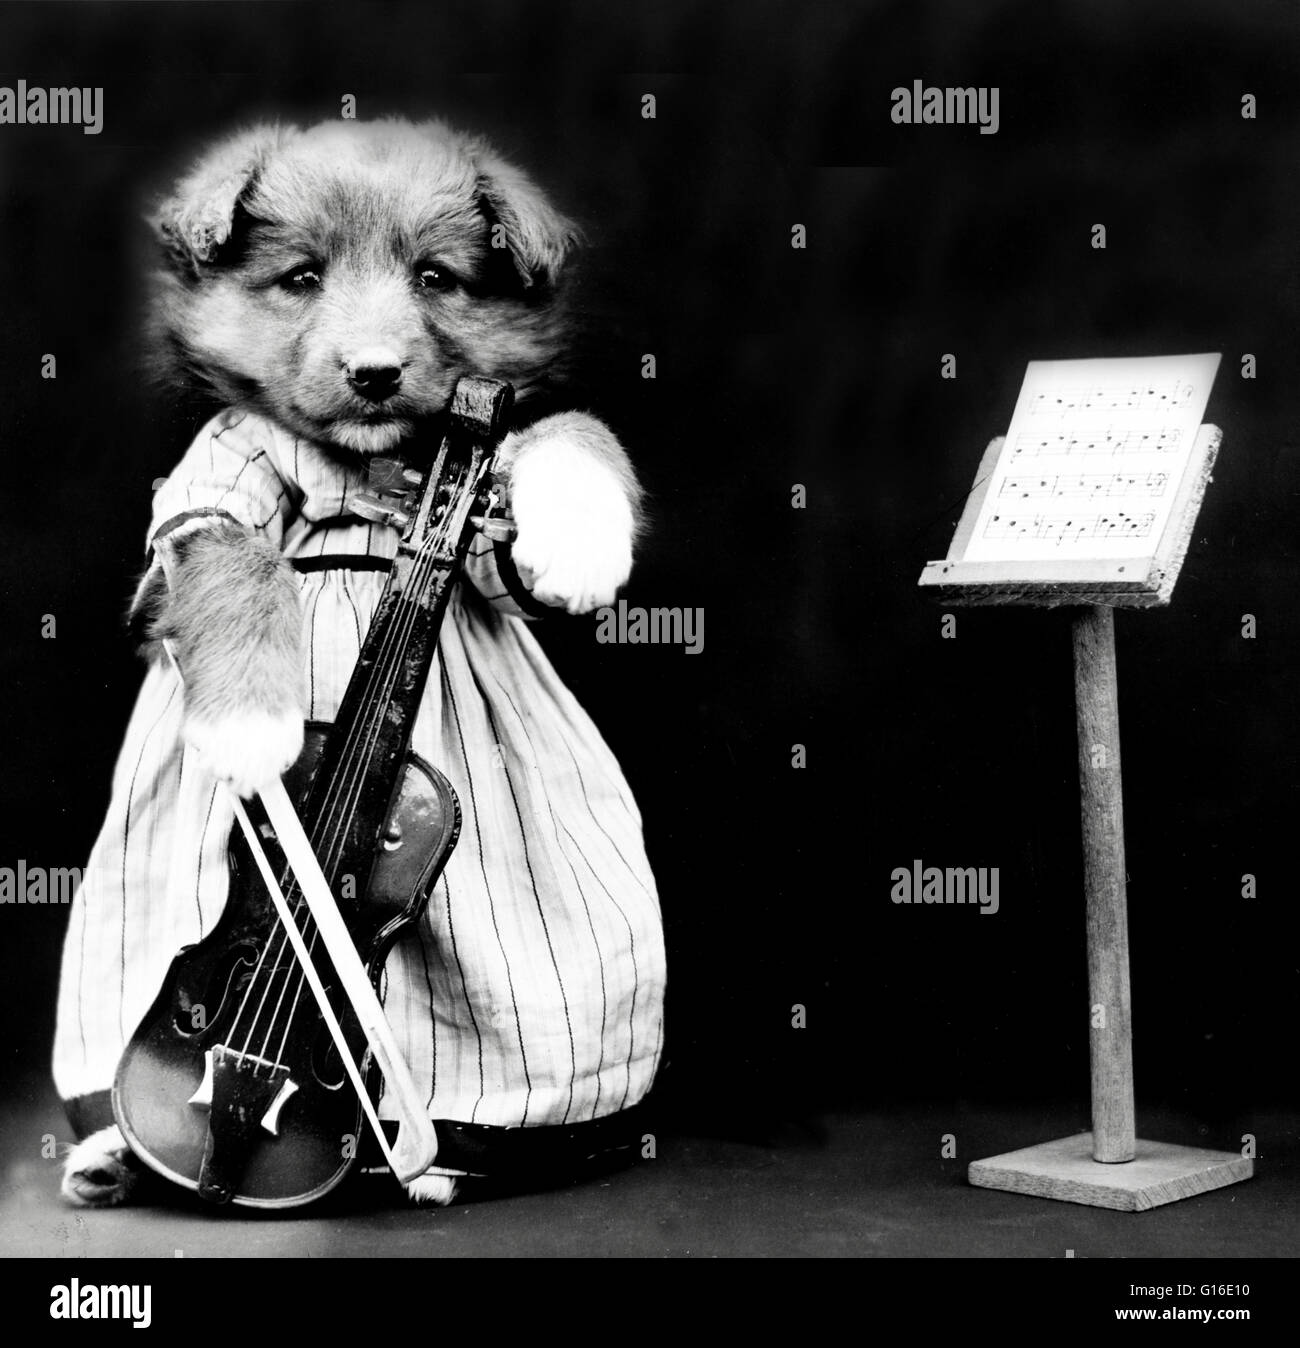 Entitled: 'The fiddler' shows a puppy playing a toy cello. Harry Whittier Frees (1879 - 1953) was an American photographer who photographed live animals dressed and posed in human situations with props. His animal photos were featured on post cards, calen Stock Photo